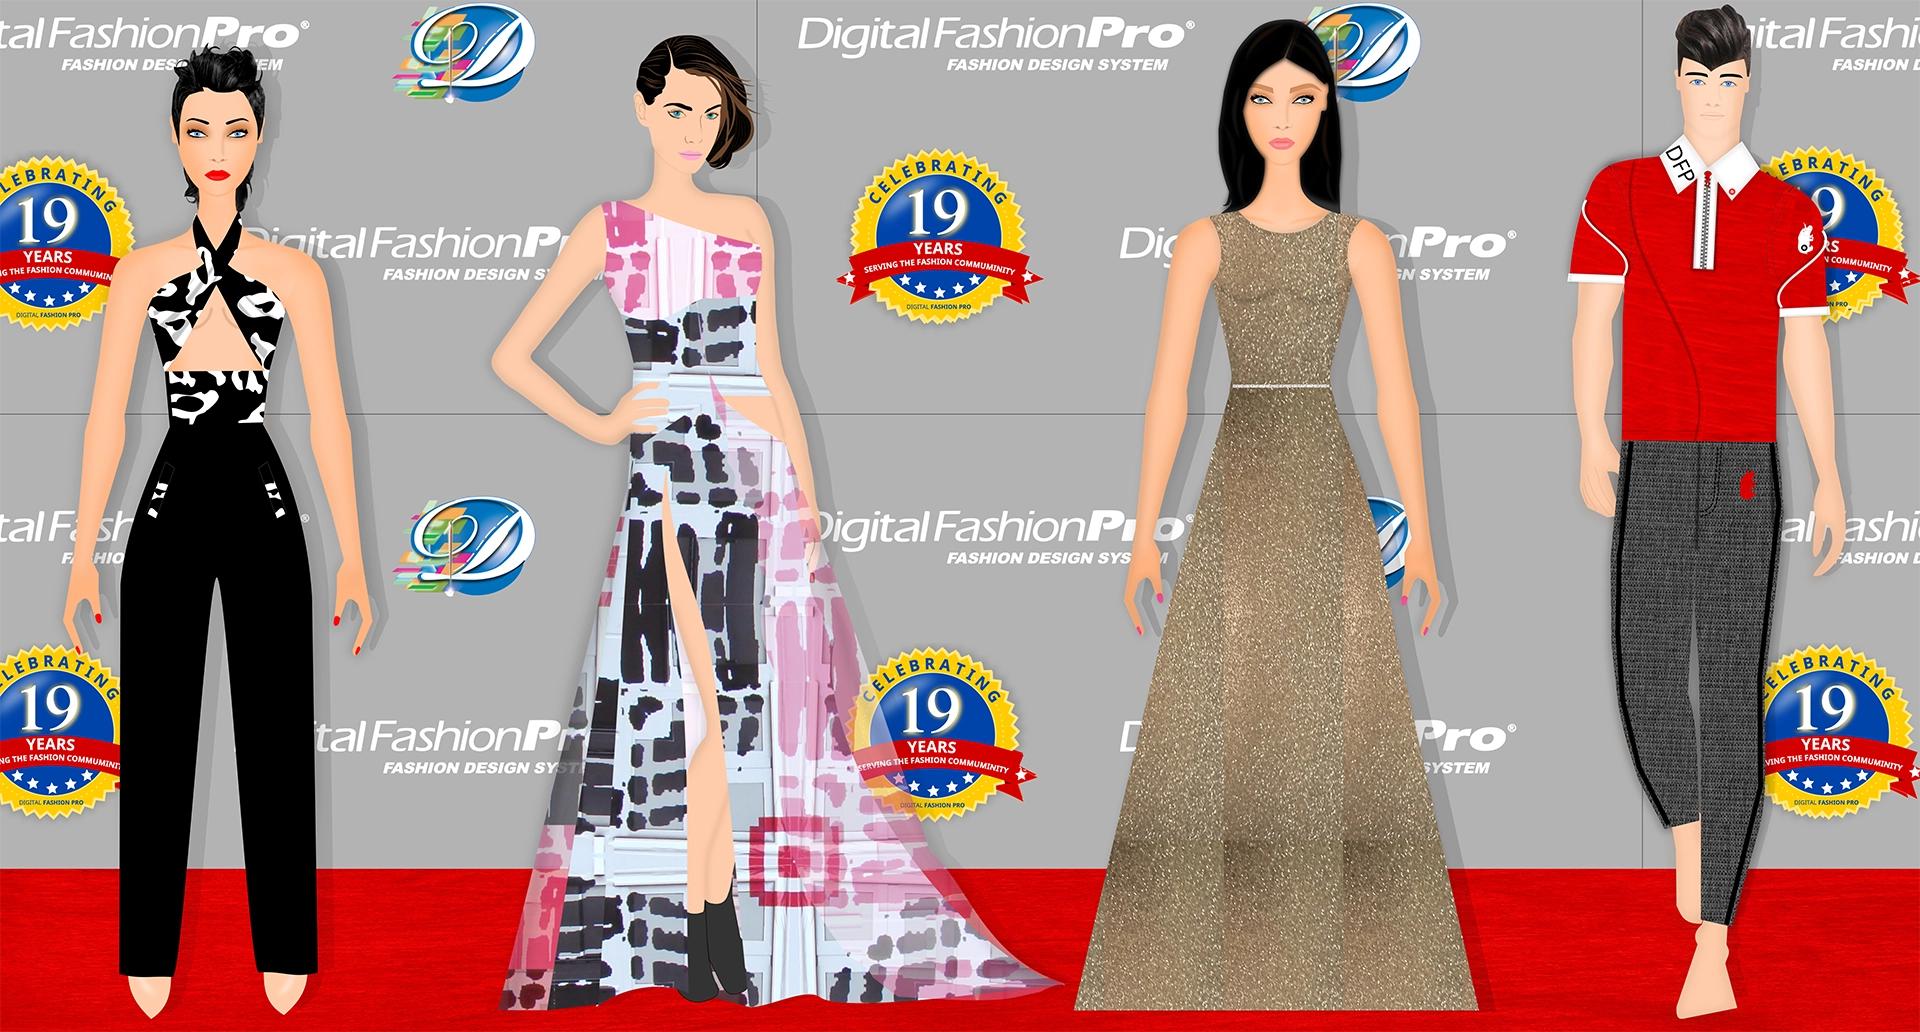 Digital Fashio Pro - Fashion Design Software - how to start your own clothing line